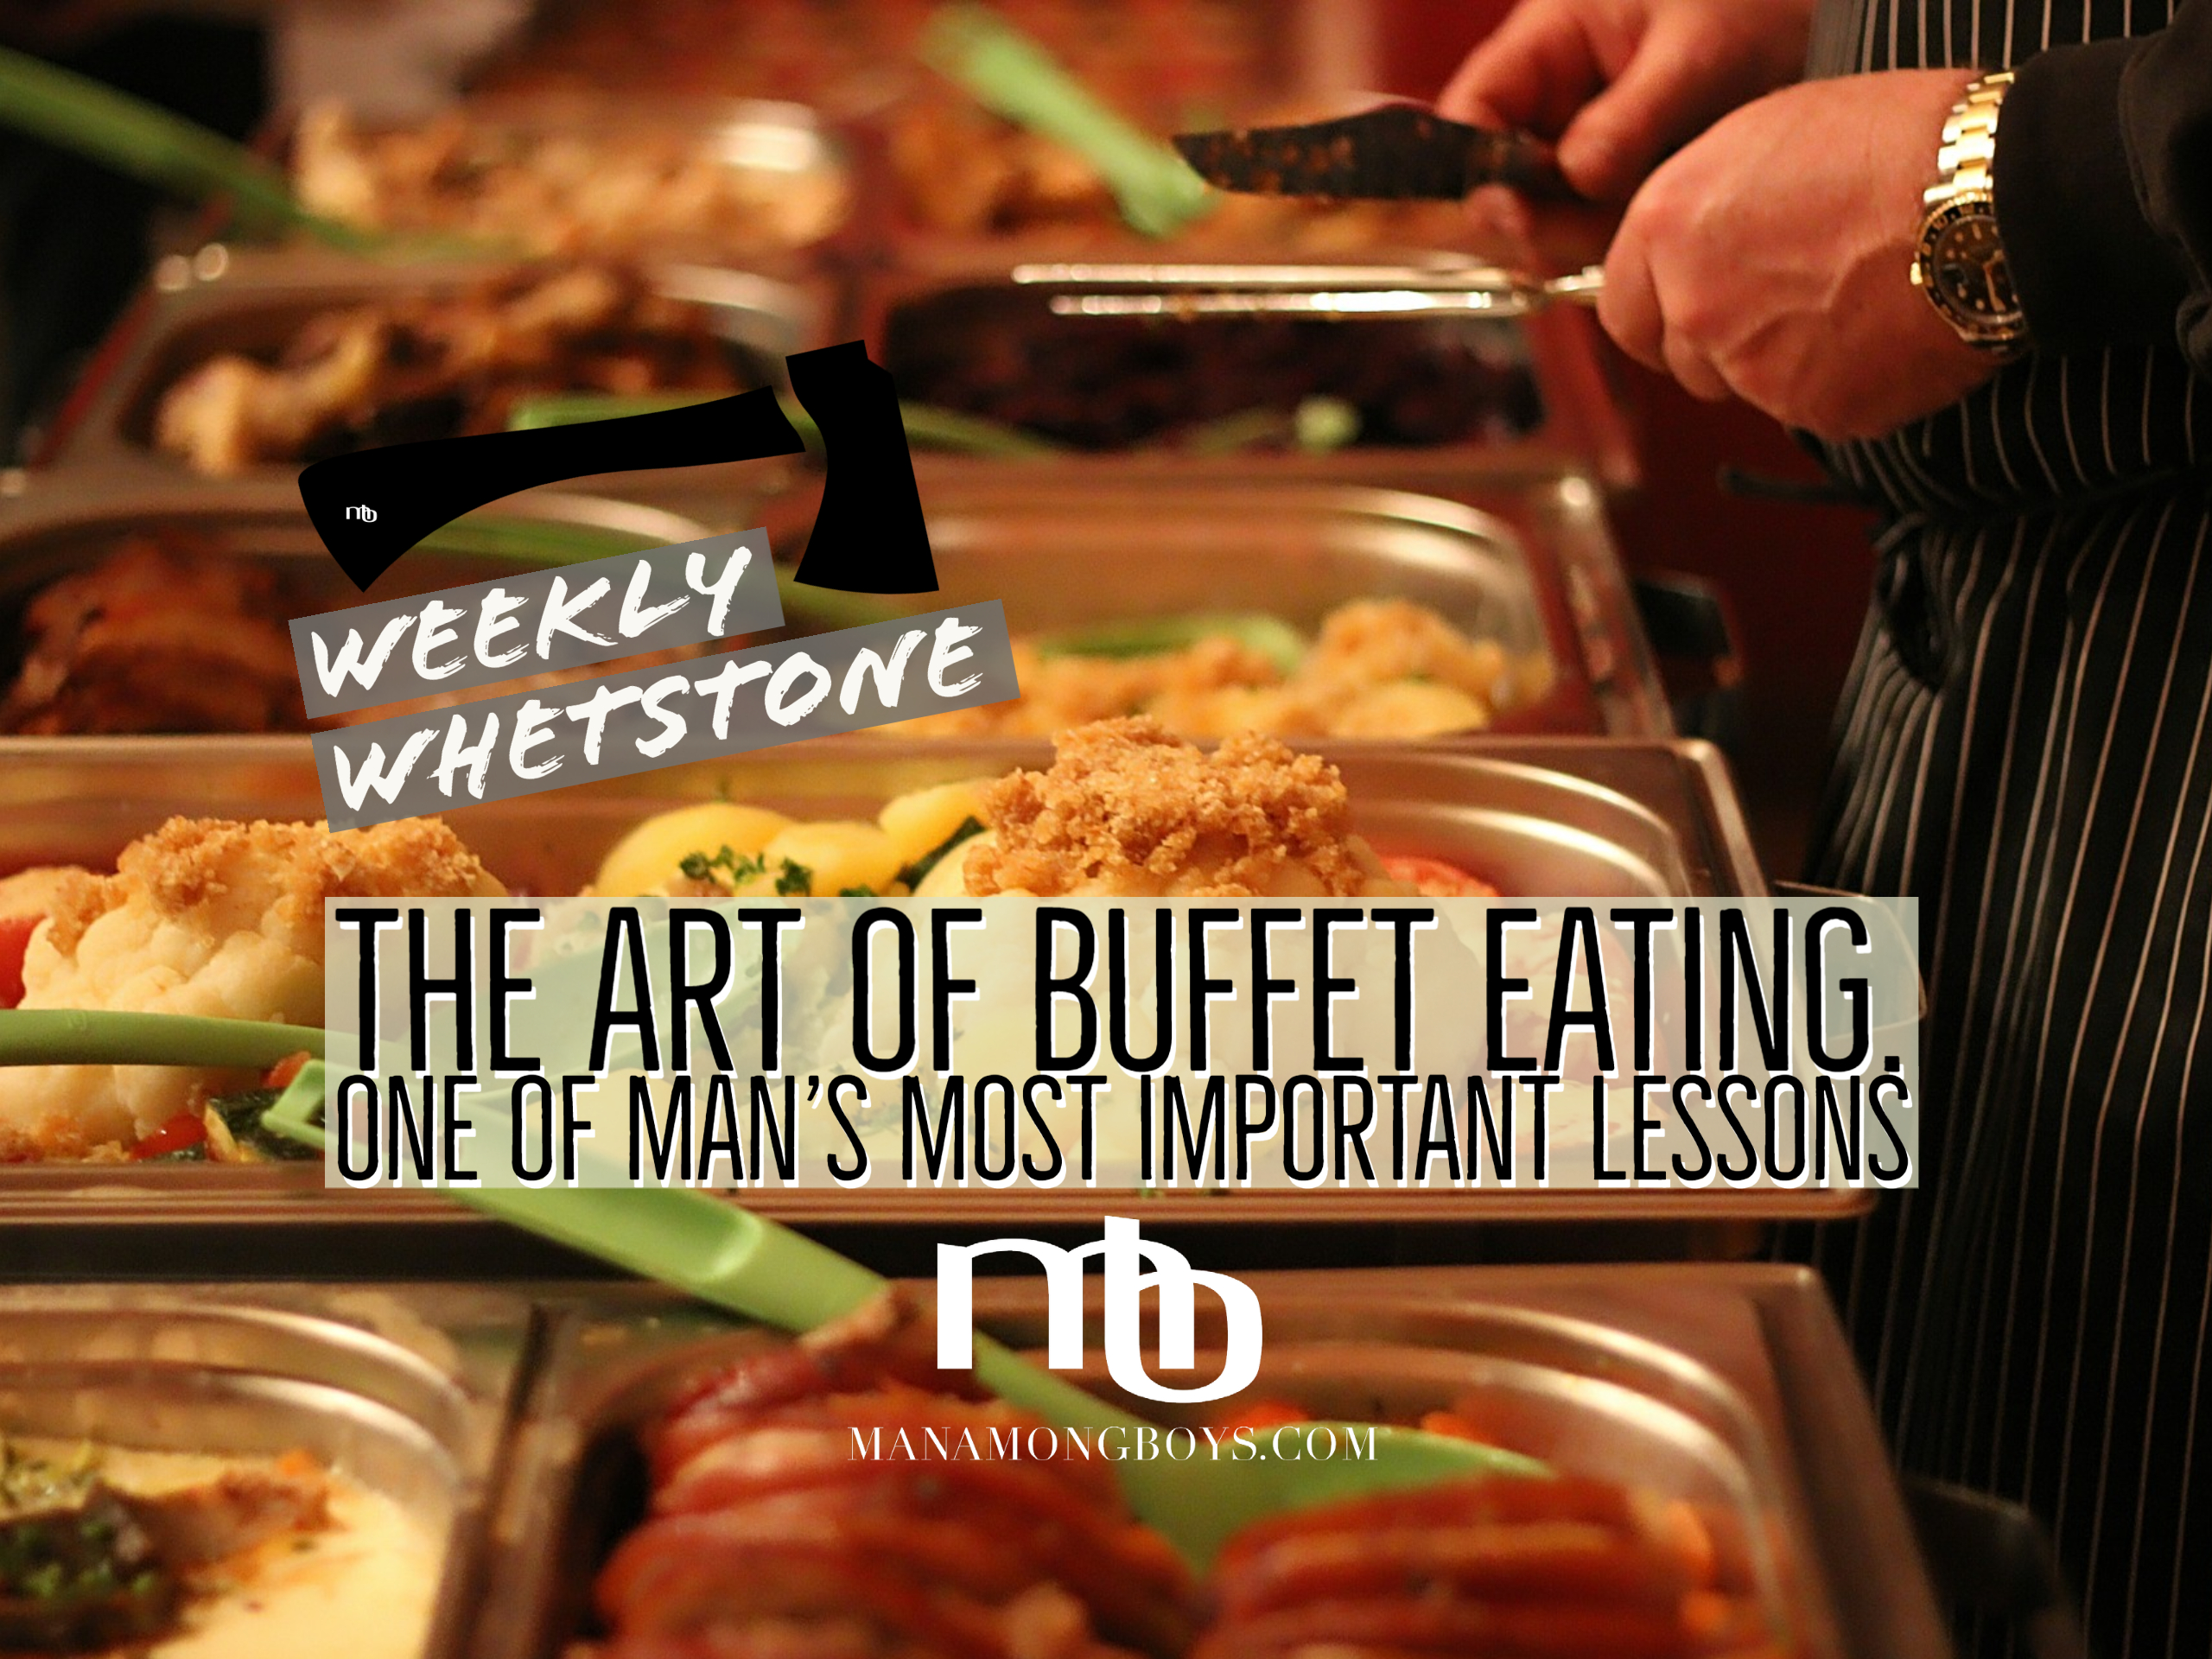 The Art of Buffet Eating.  One of Man’s Most Important Lessons